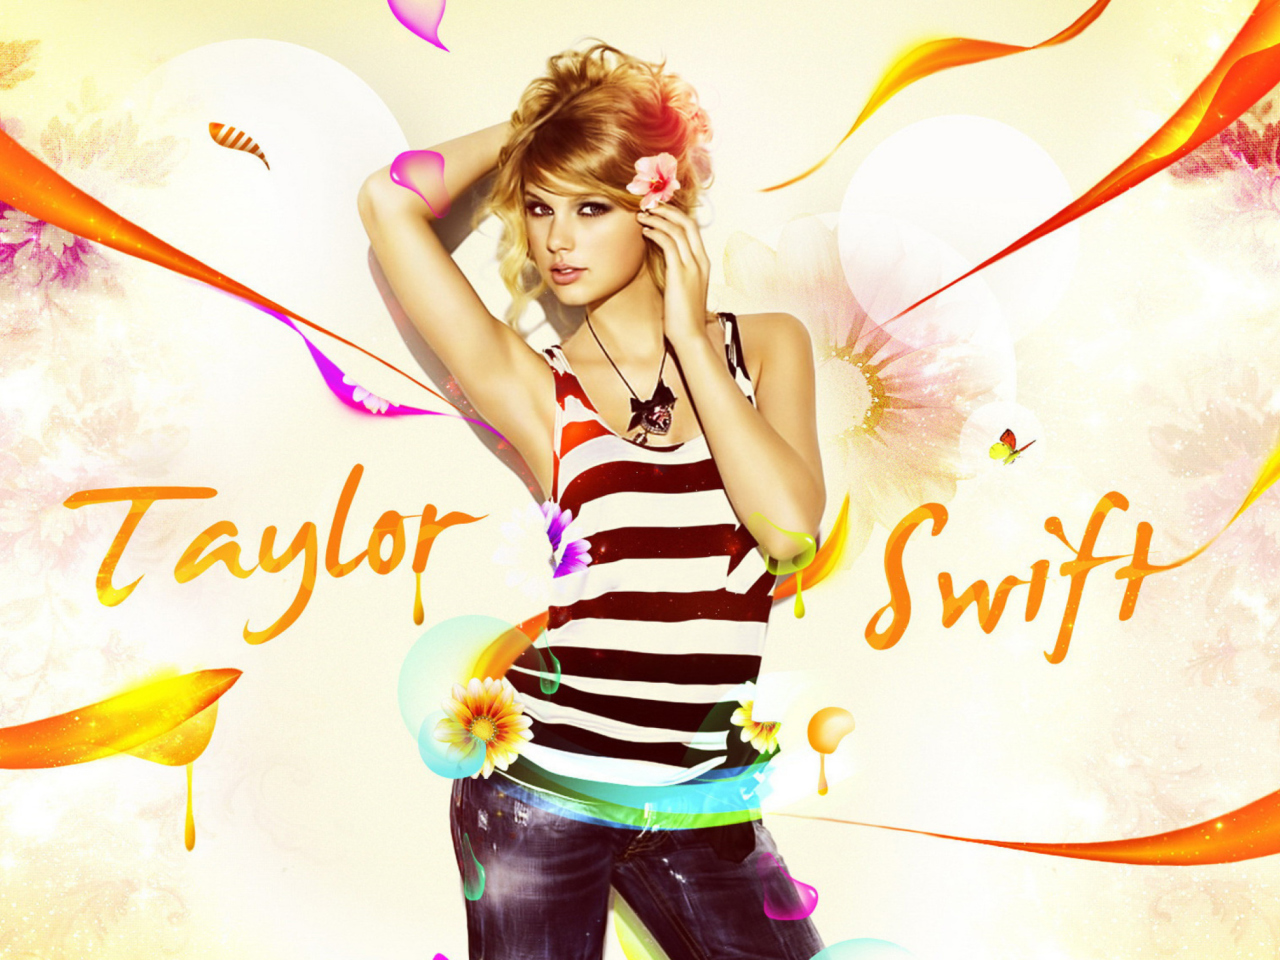 Taylor Swift Wallpaper For Android 1280x960